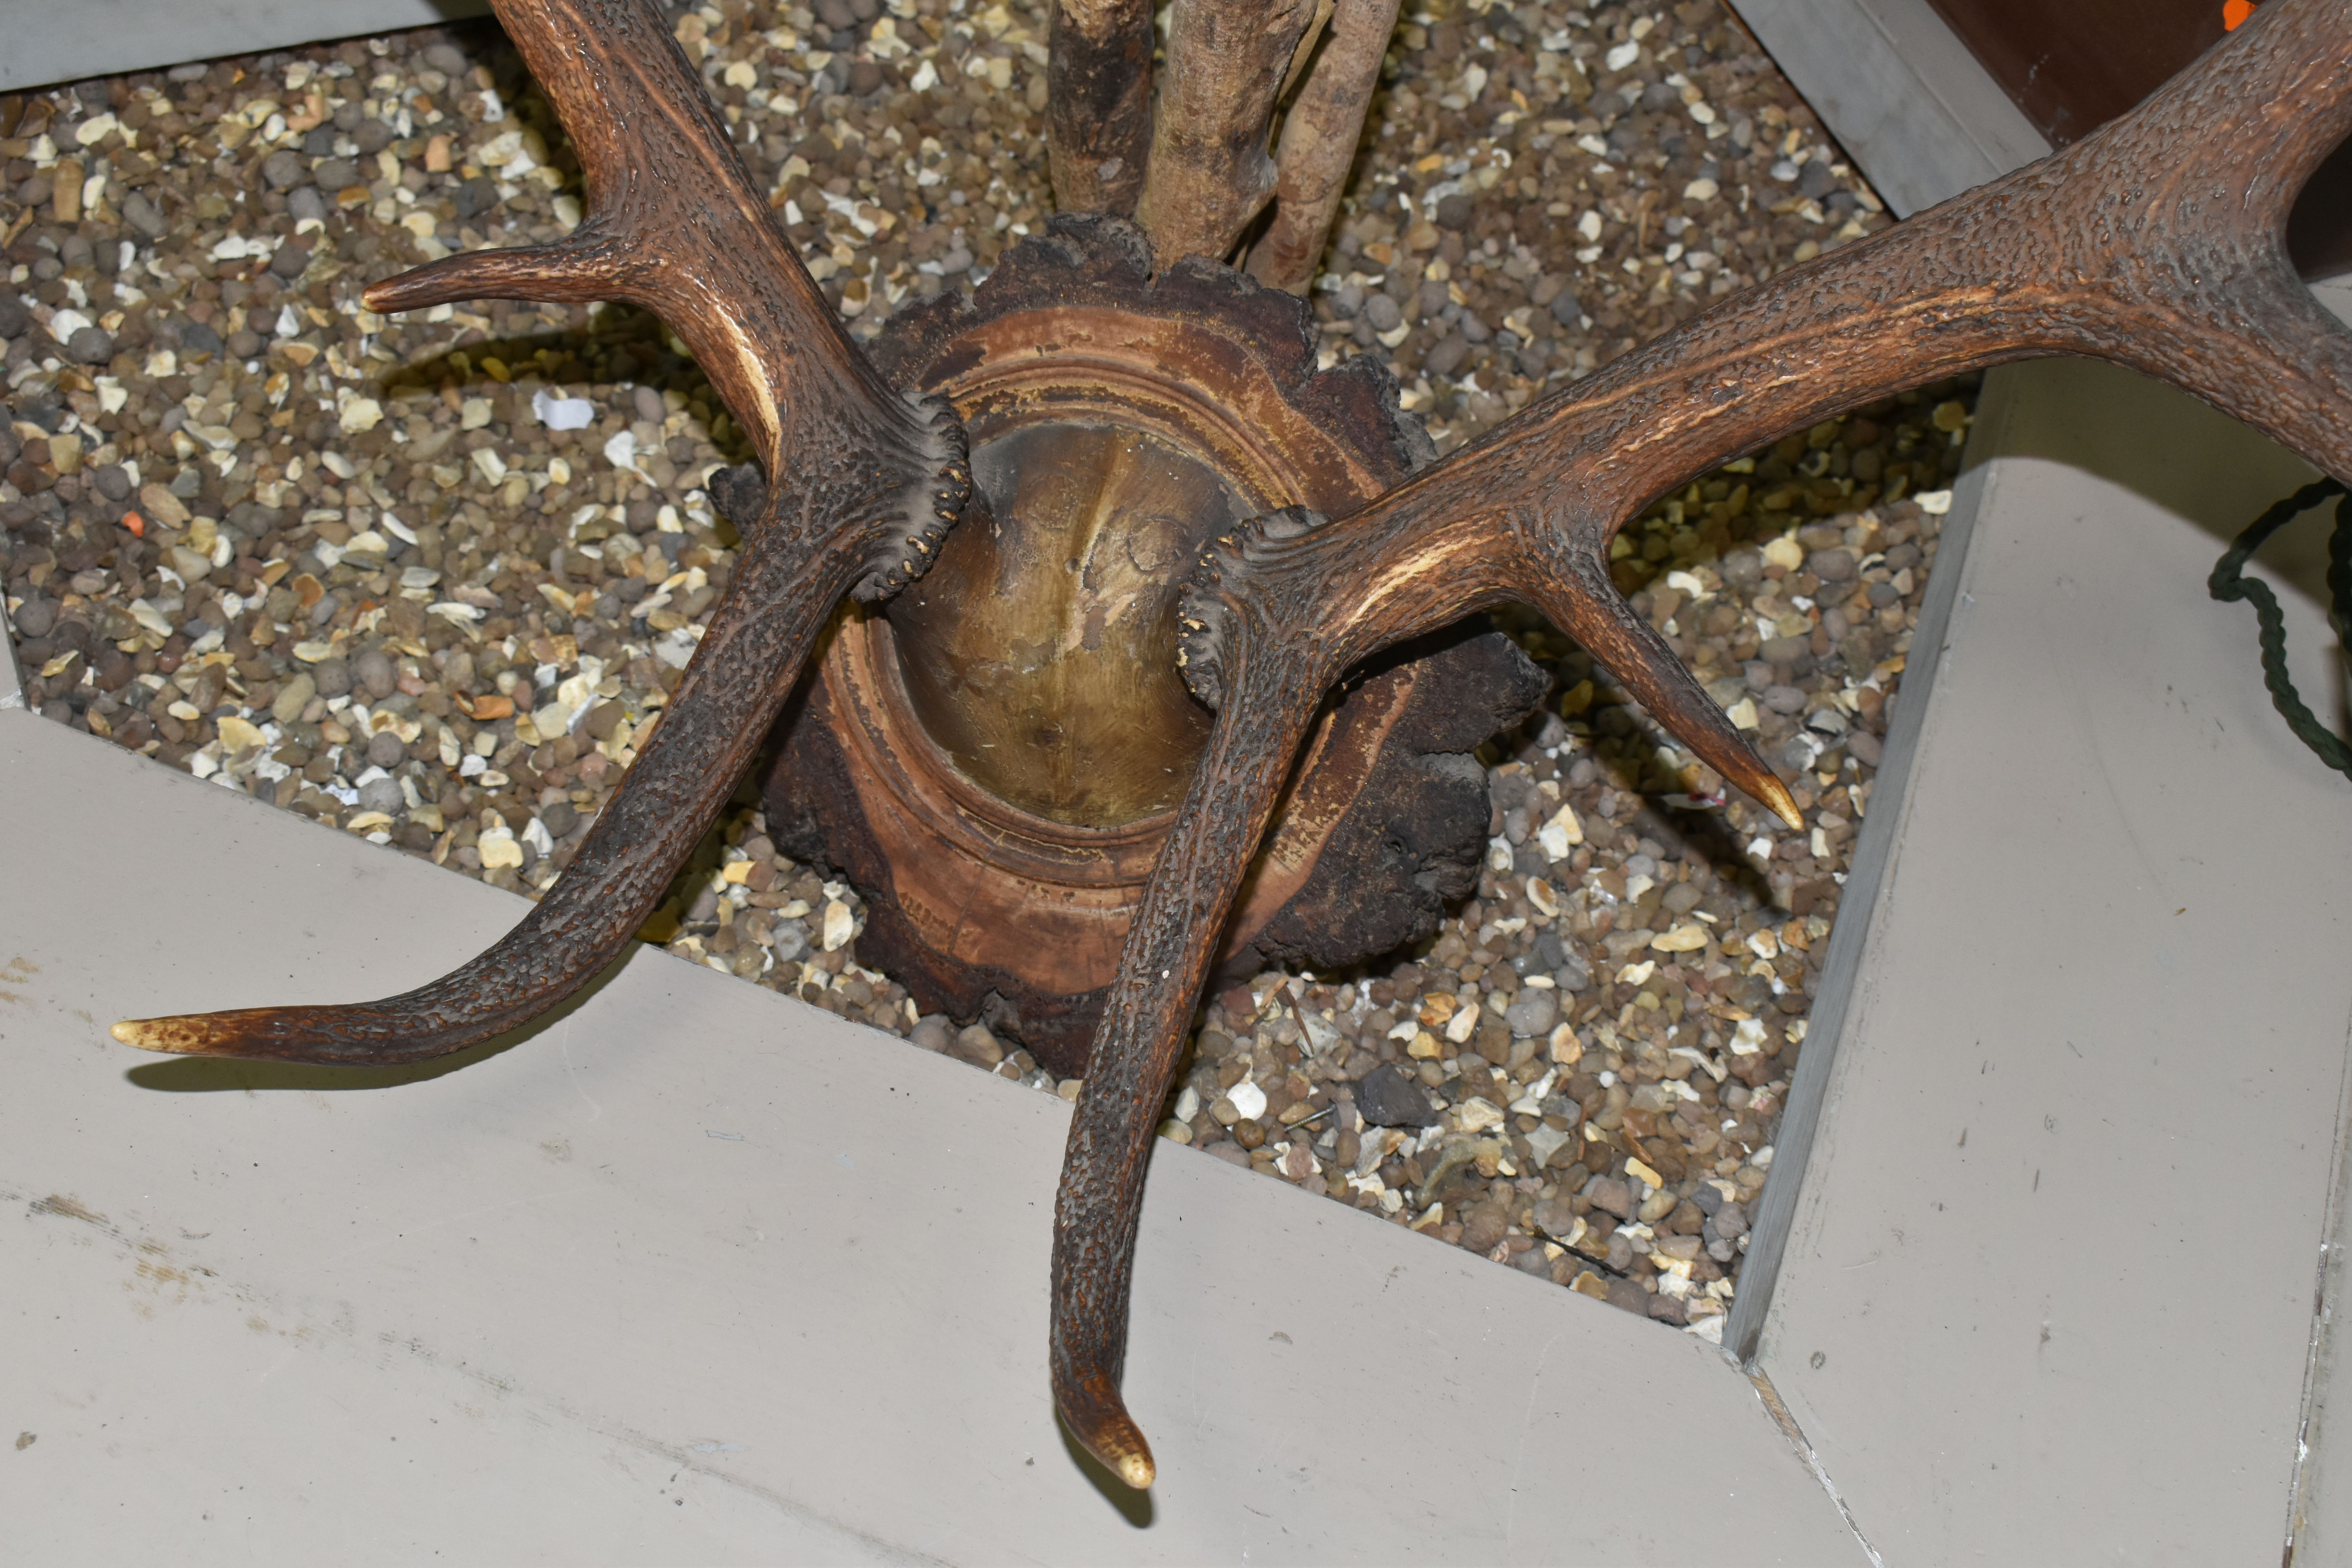 A MOUNTED SET OF RED DEER ANTLERS, mounted on a natural wooden setting, ten points attached to - Image 2 of 5